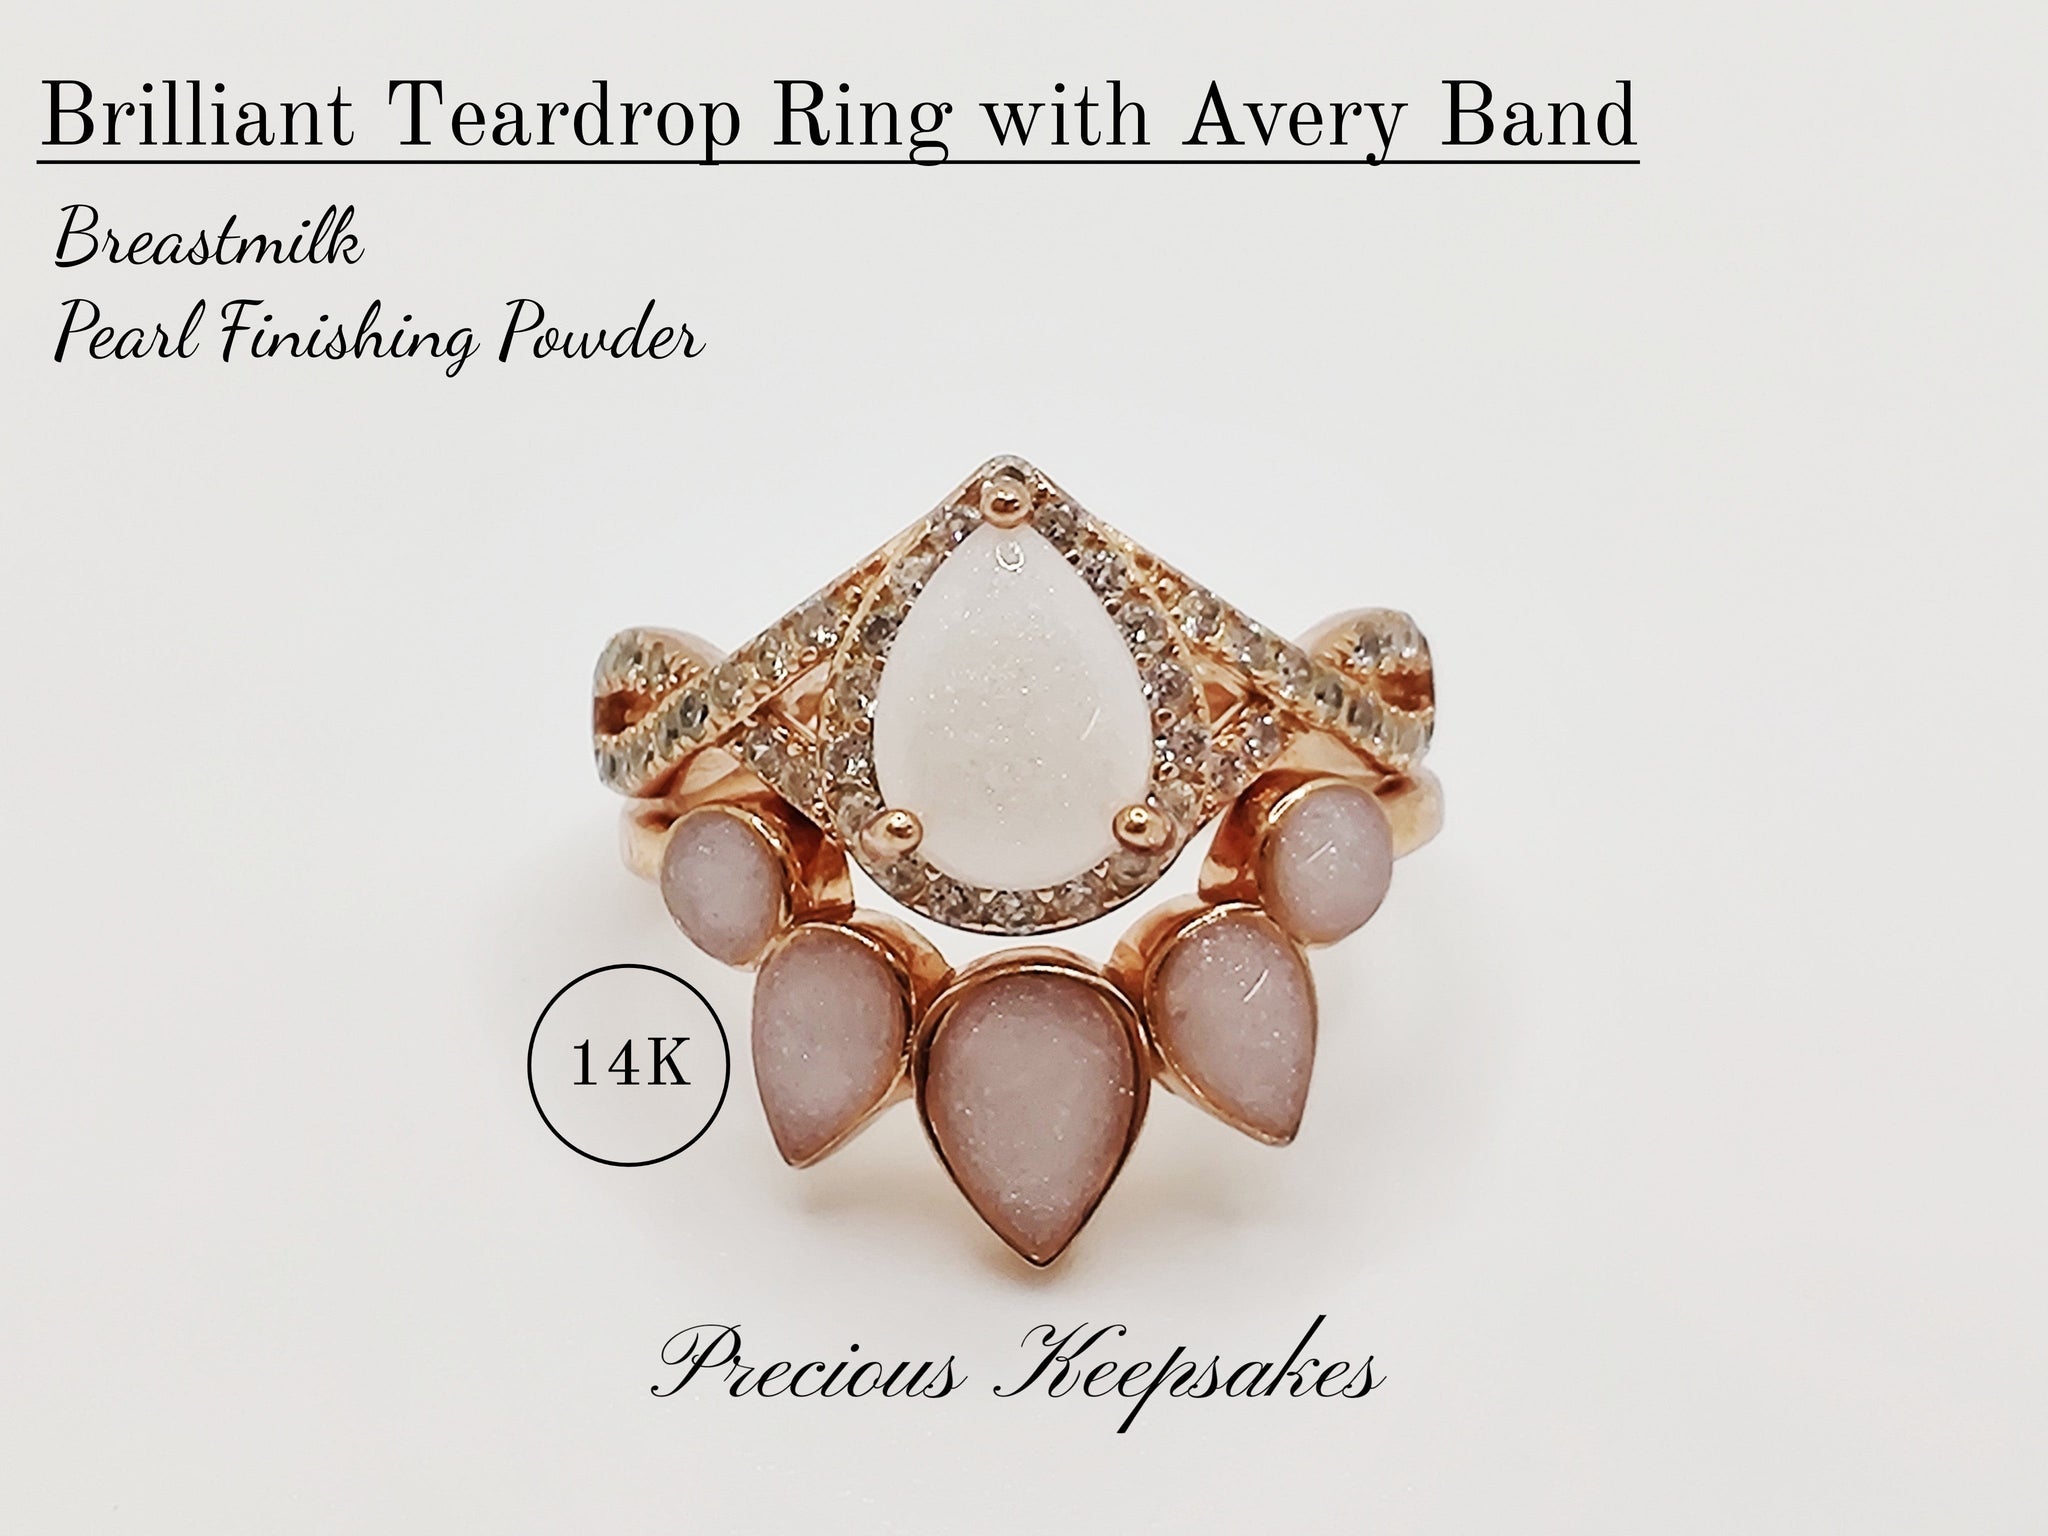 Brilliant Teardrop Ring with Avery Band 14K